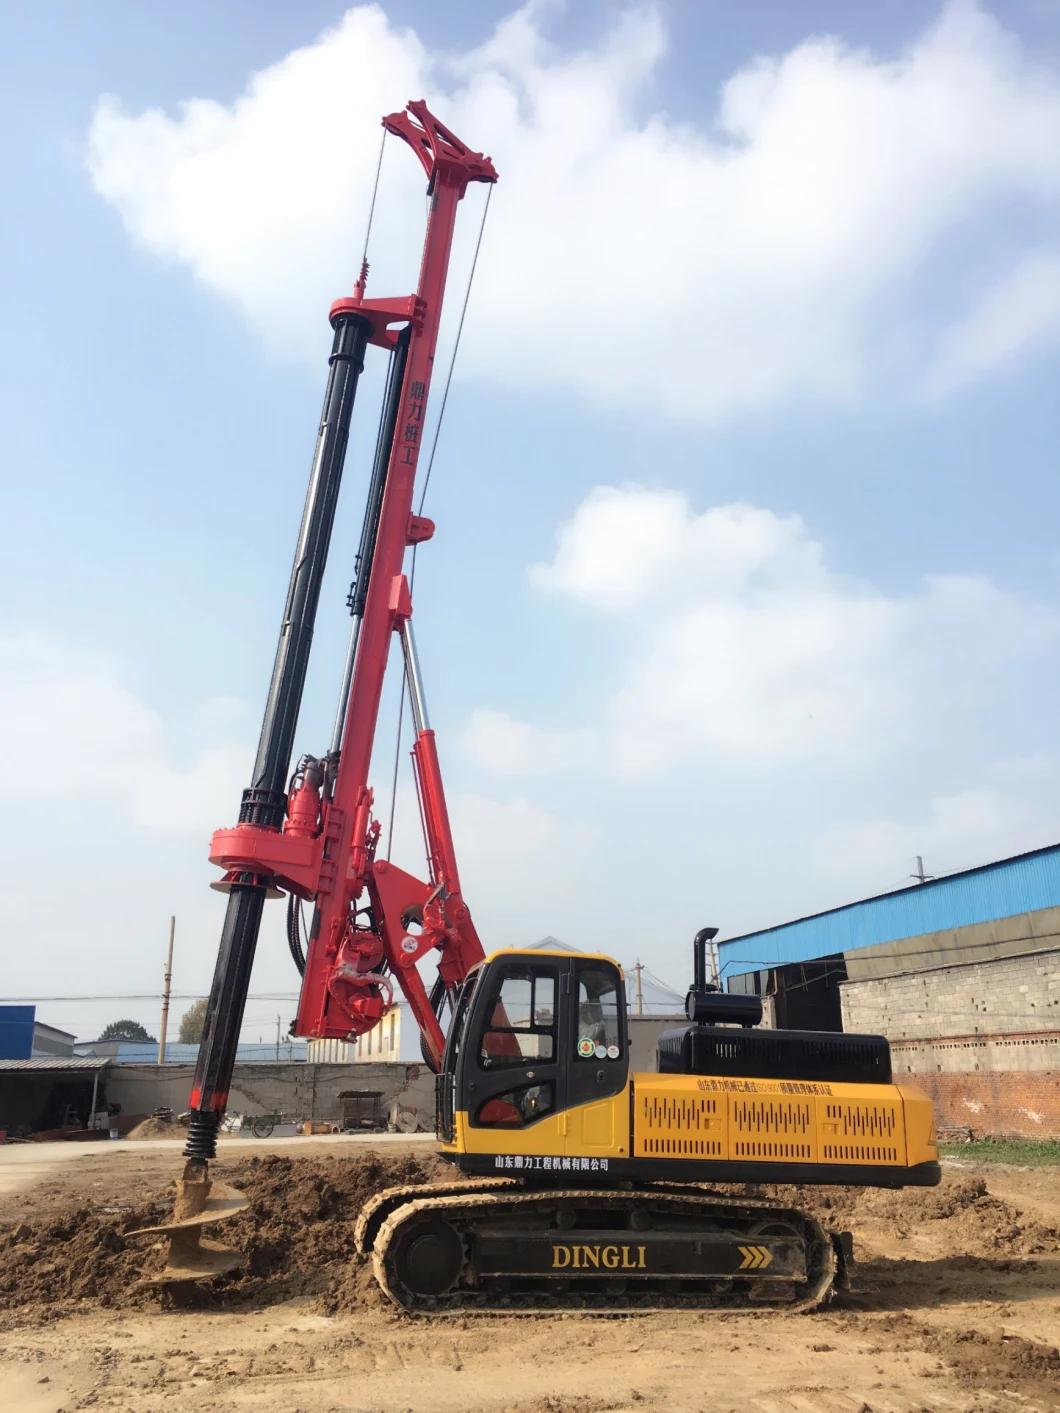 Small Hydraulic Piling/Drilling Rig Machine Dr-100 Portable Core/Engineering Drill Rig Depth 20m with Two Drill Bit for Free